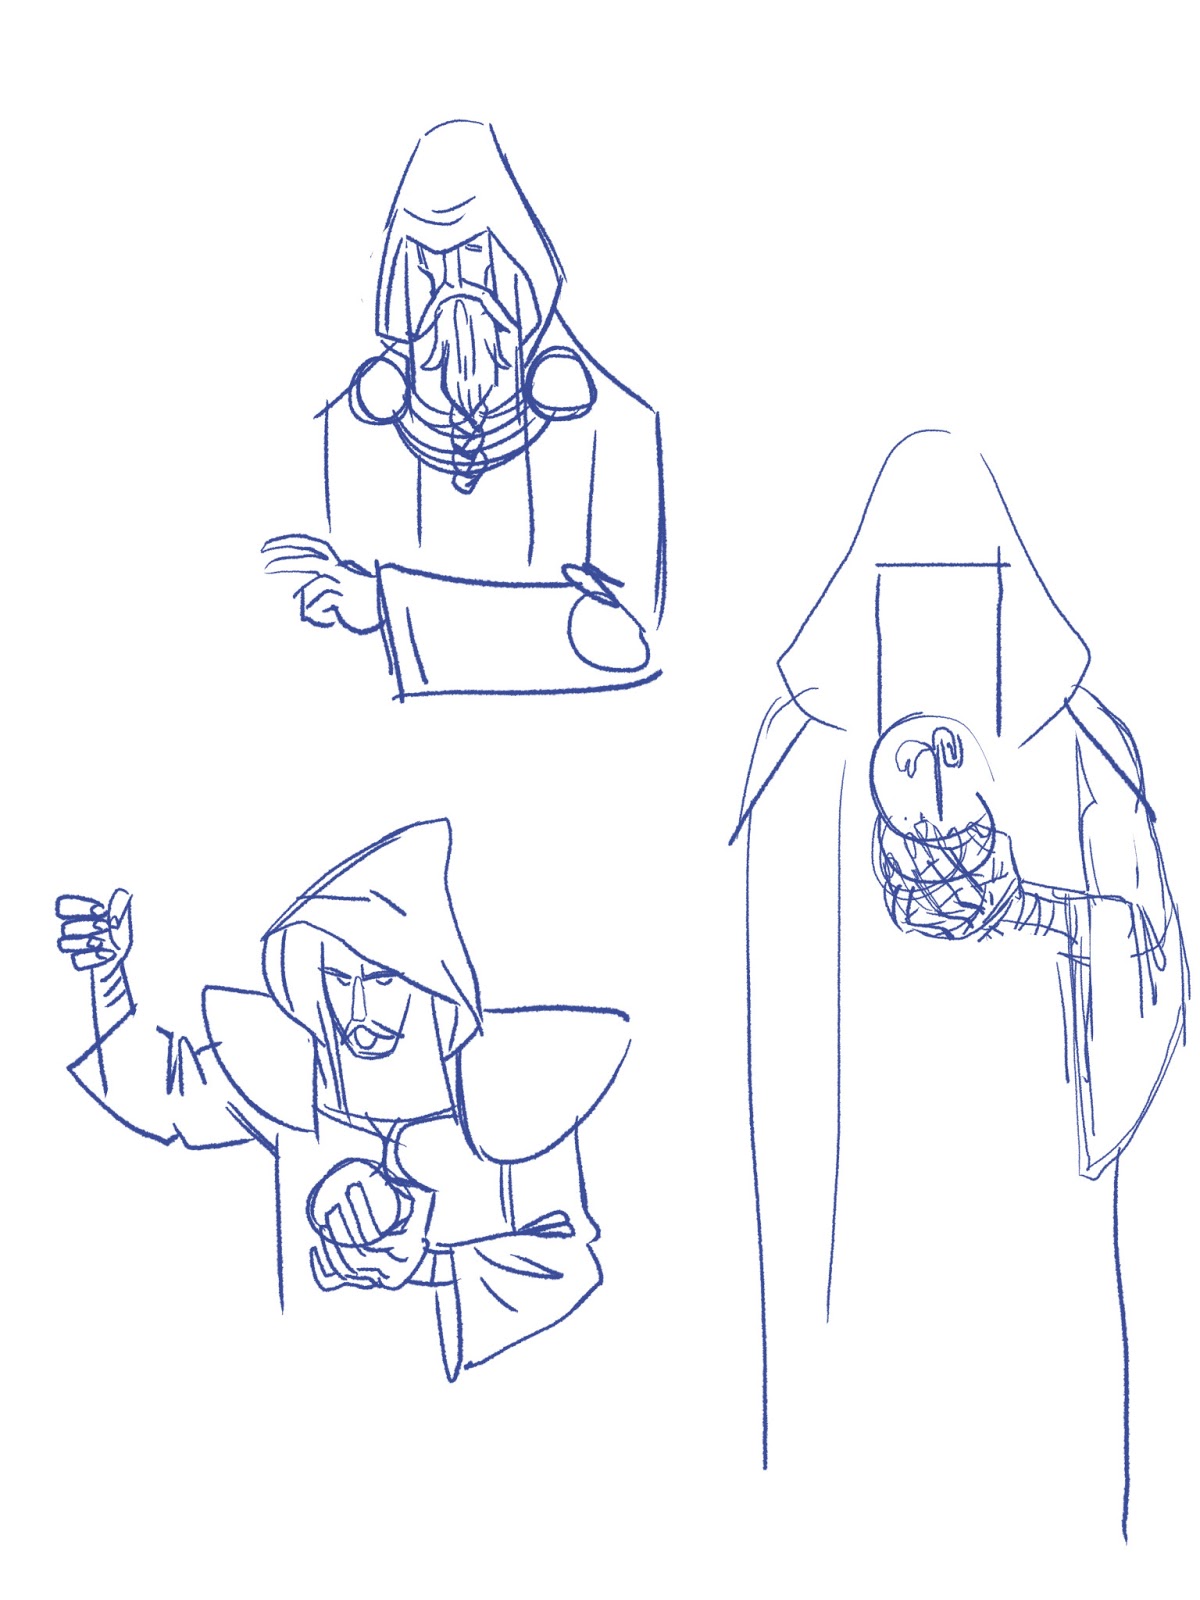 Sketches of M. S. Corley: Druid sketch